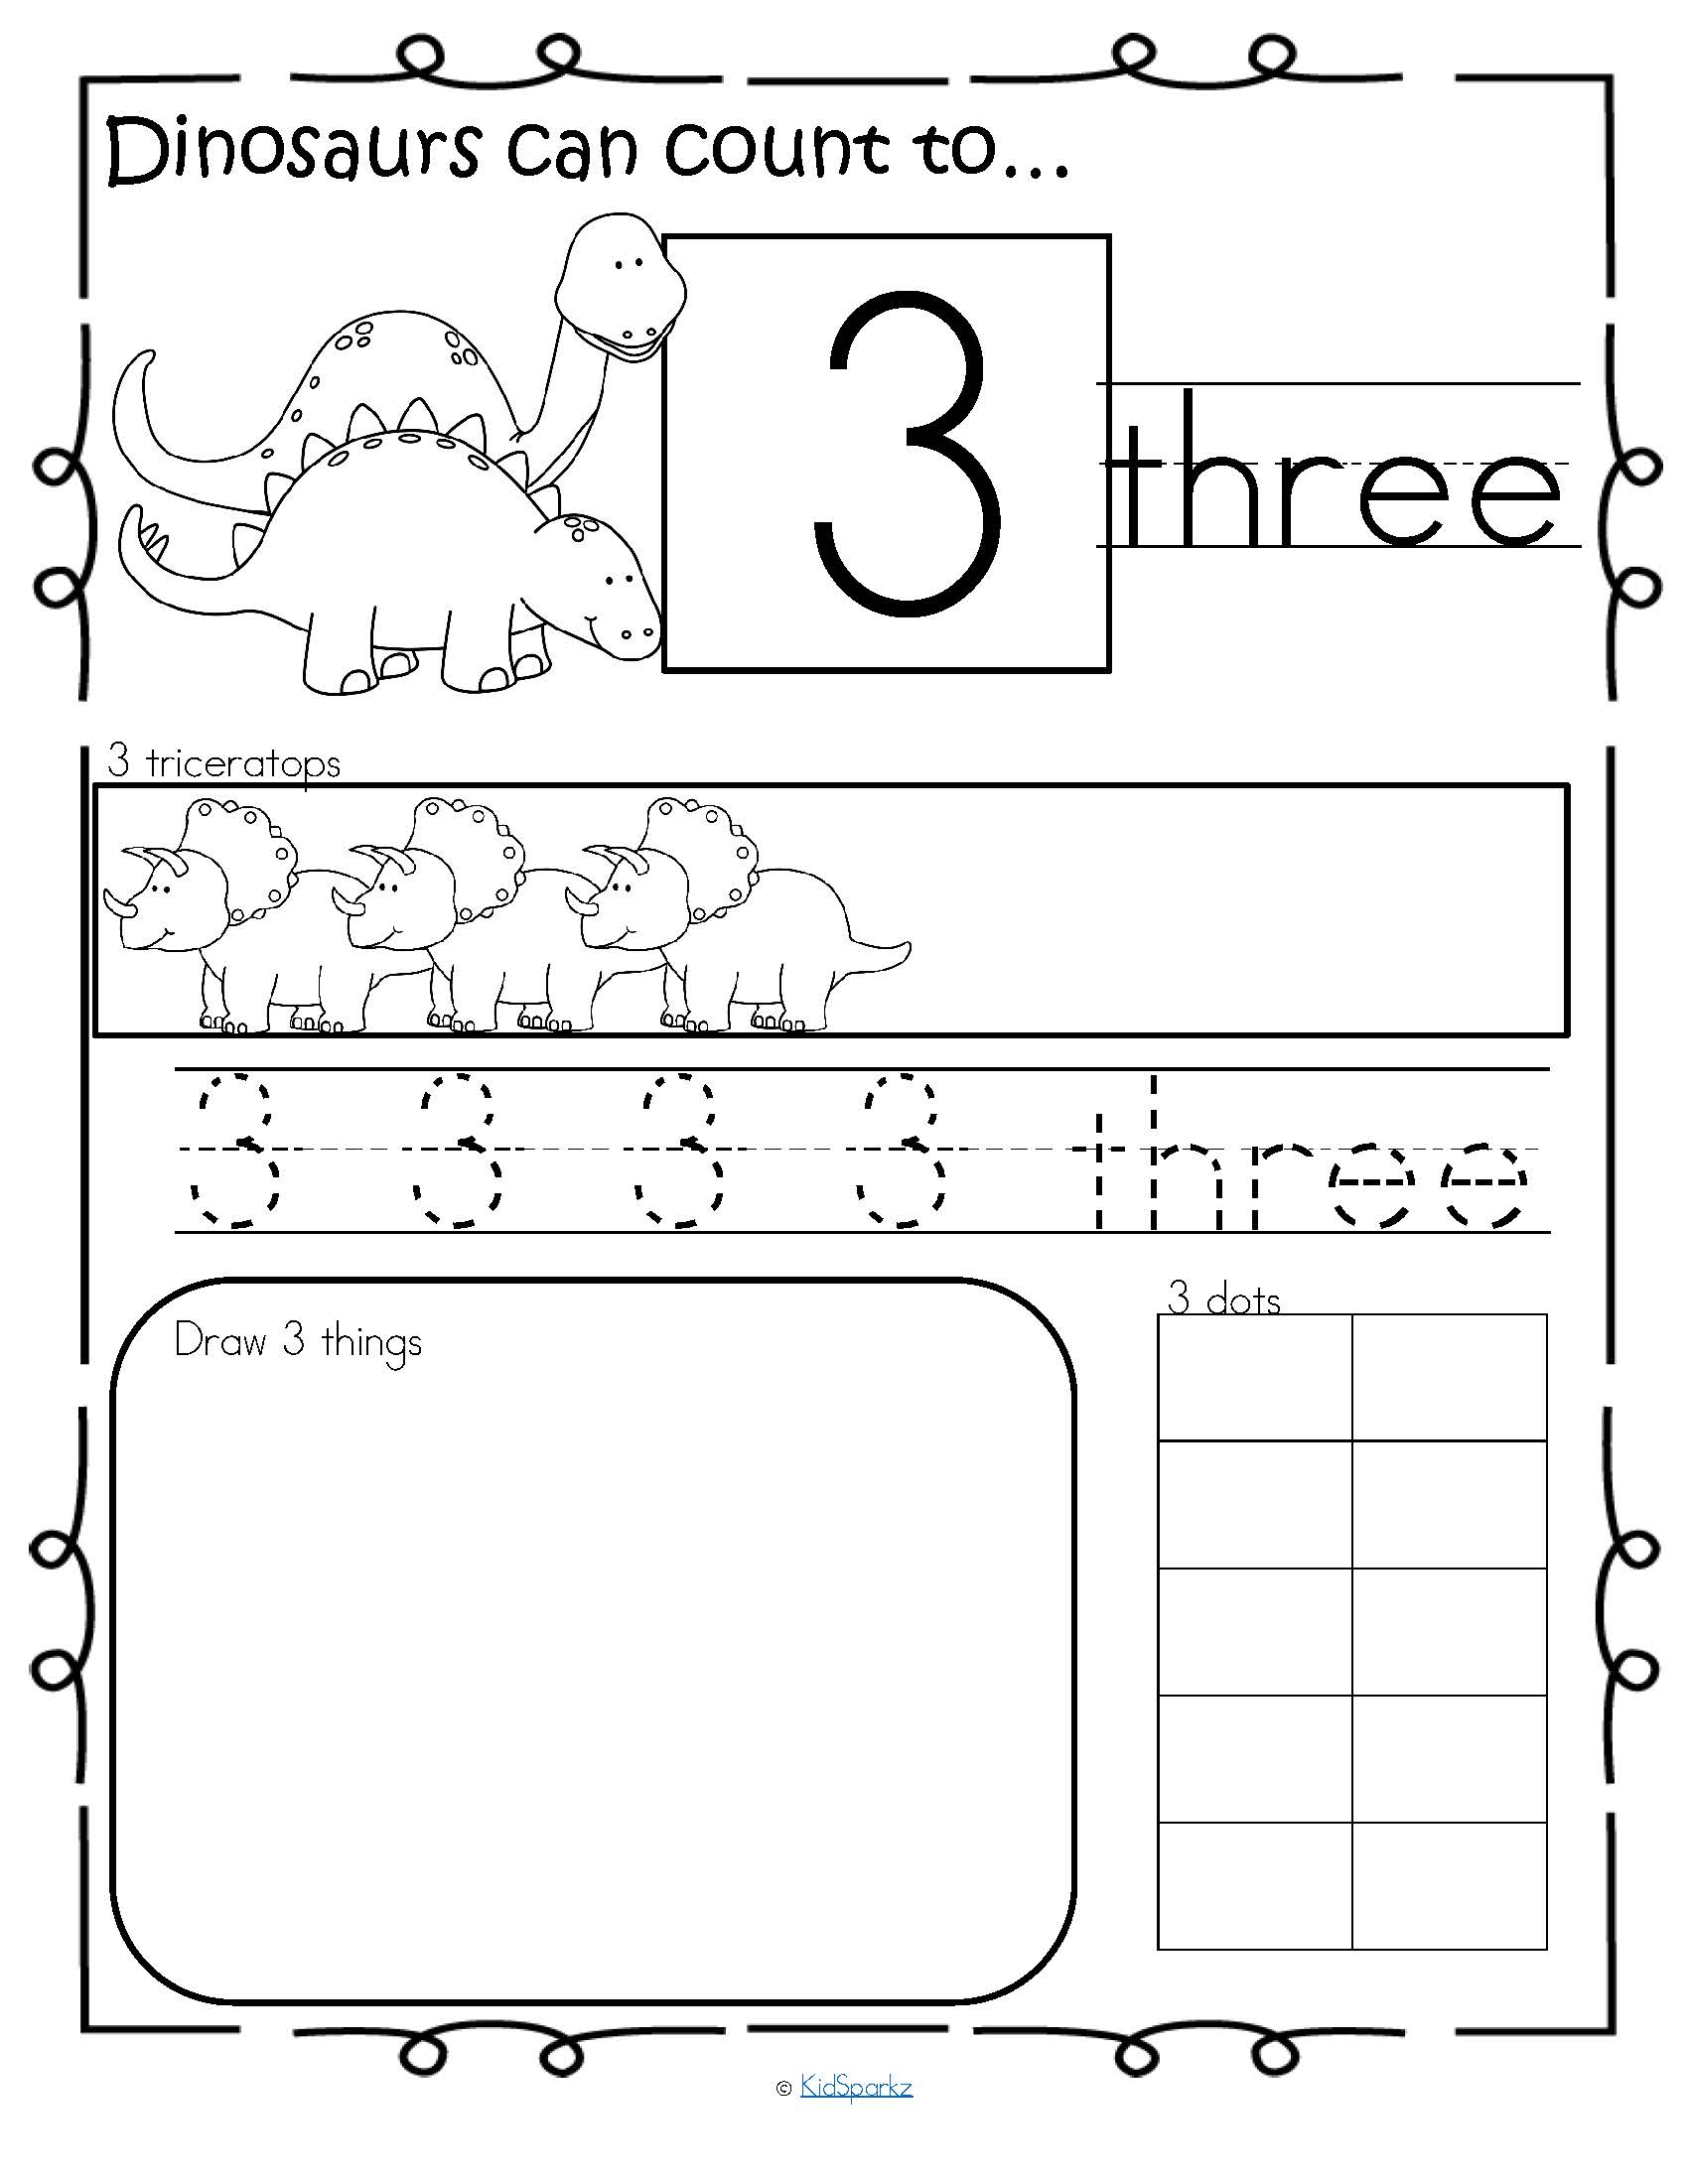 dinosaurs-number-practice-printables-recognition-tracing-counting-1-20